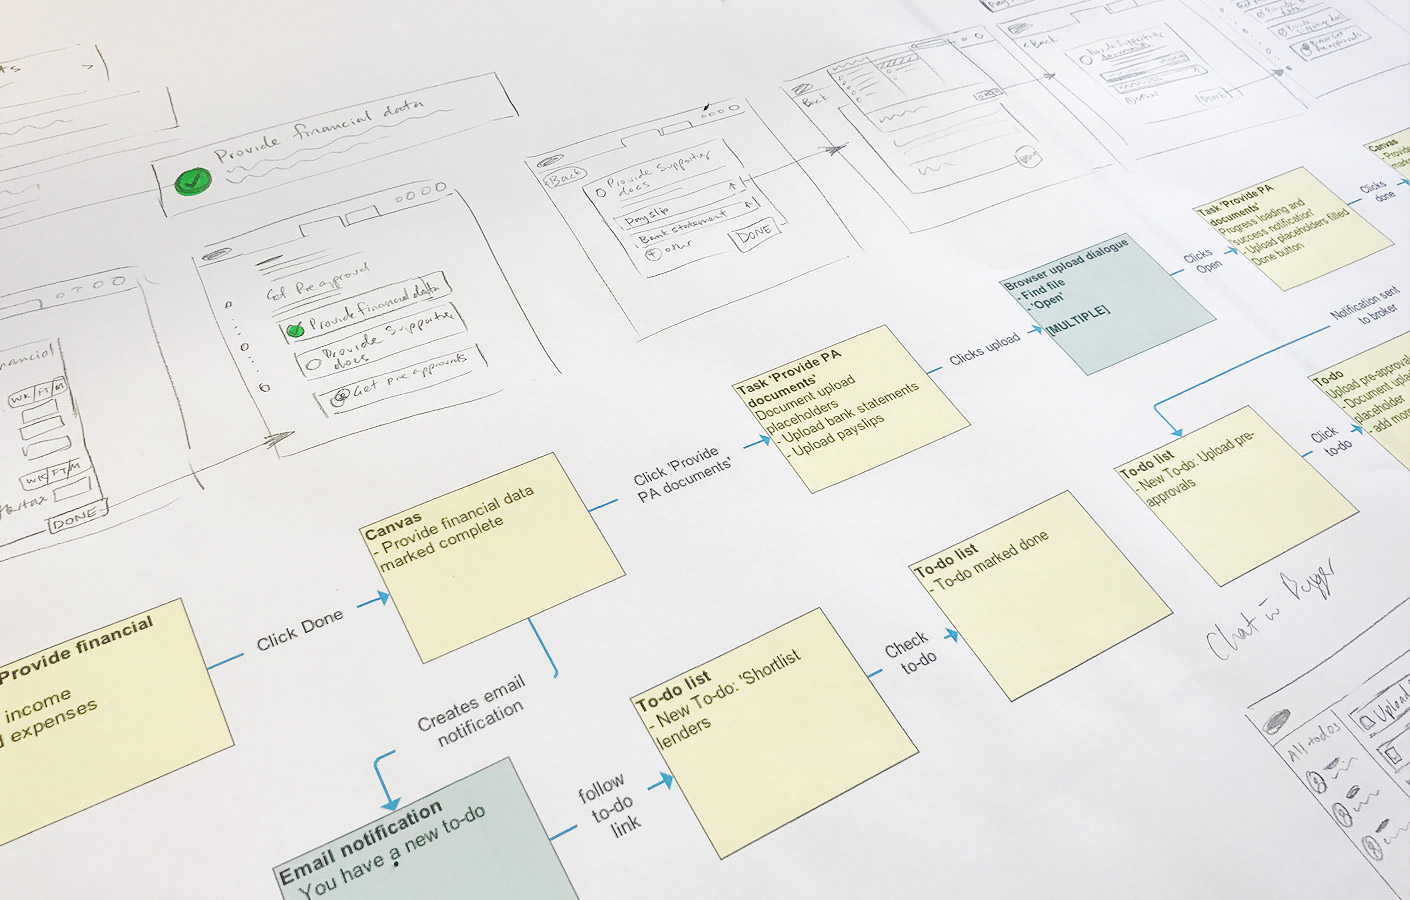 Product mapping and sketches